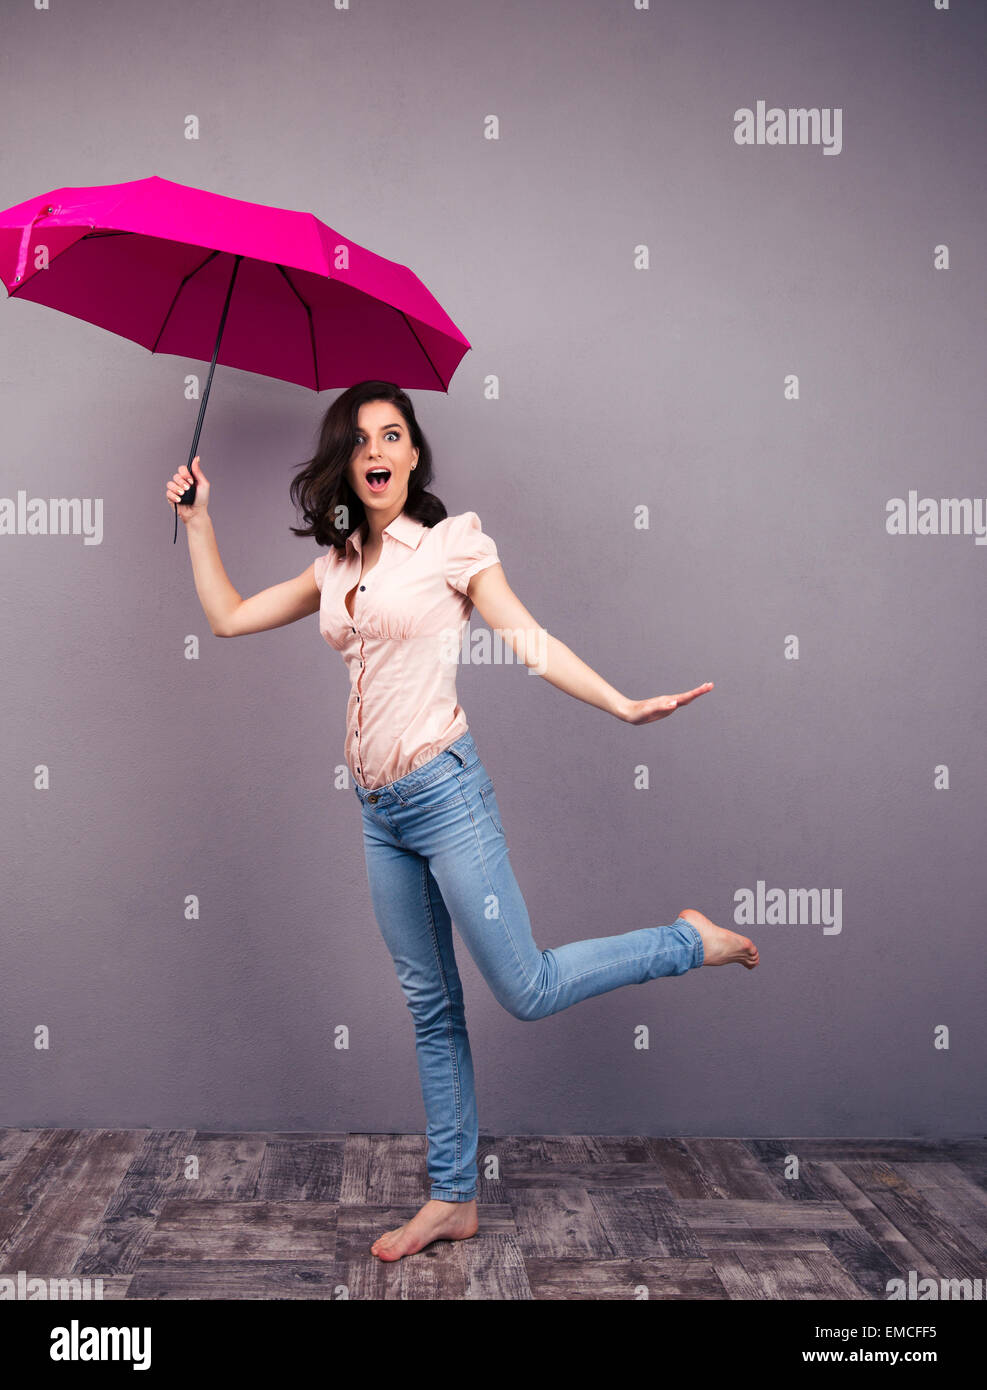 Full length portrait of a surprised woman posing with pink umbrella in studio. Wearing in jeans and shirt. Barefoot. Looking at  Stock Photo